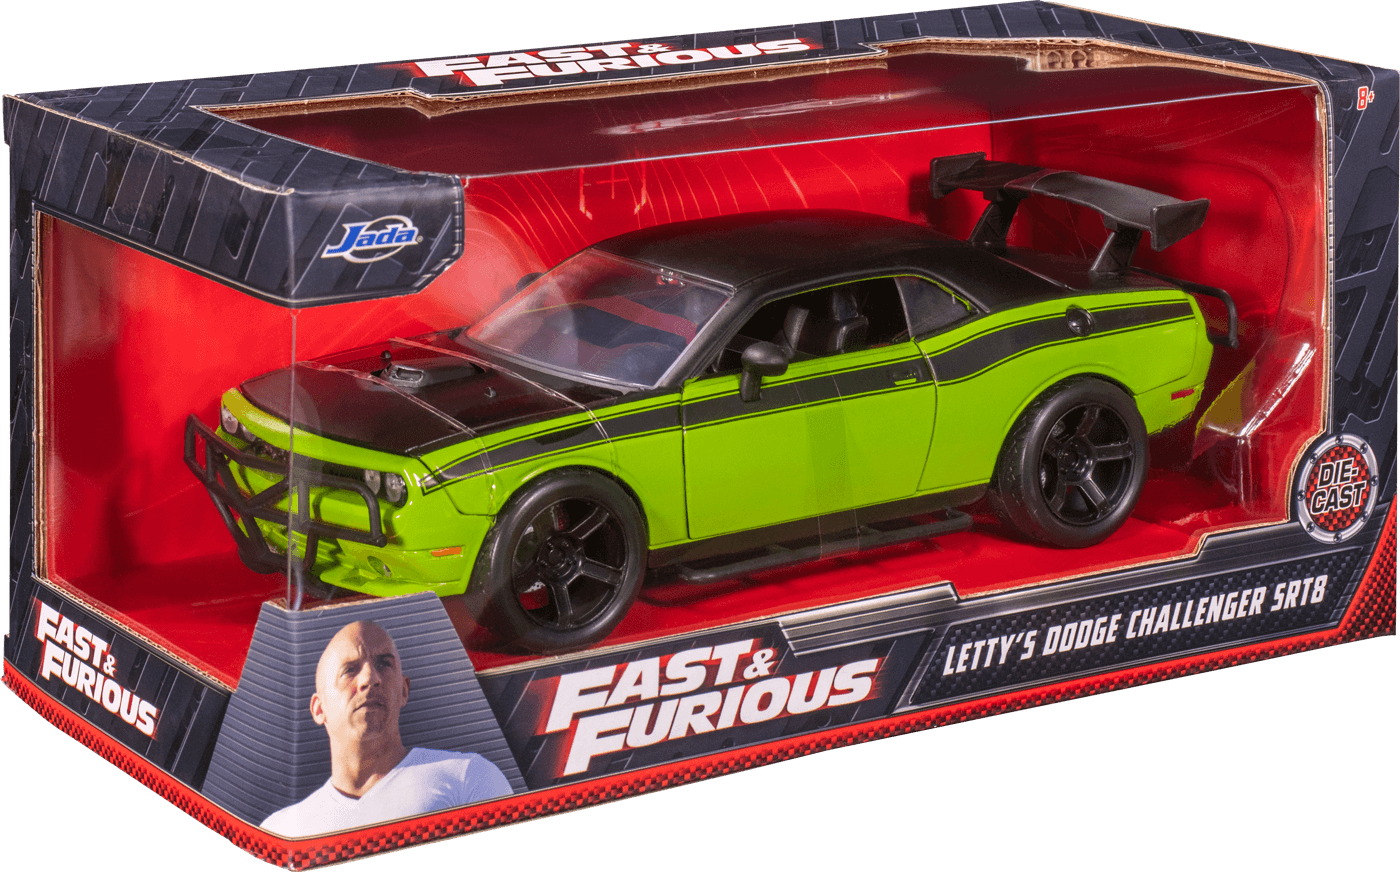 JAD97131 Fast and Furious - Dodge Challenger SRT8-Off Road 1:24 Scale Hollywood Ride - Jada Toys - Titan Pop Culture